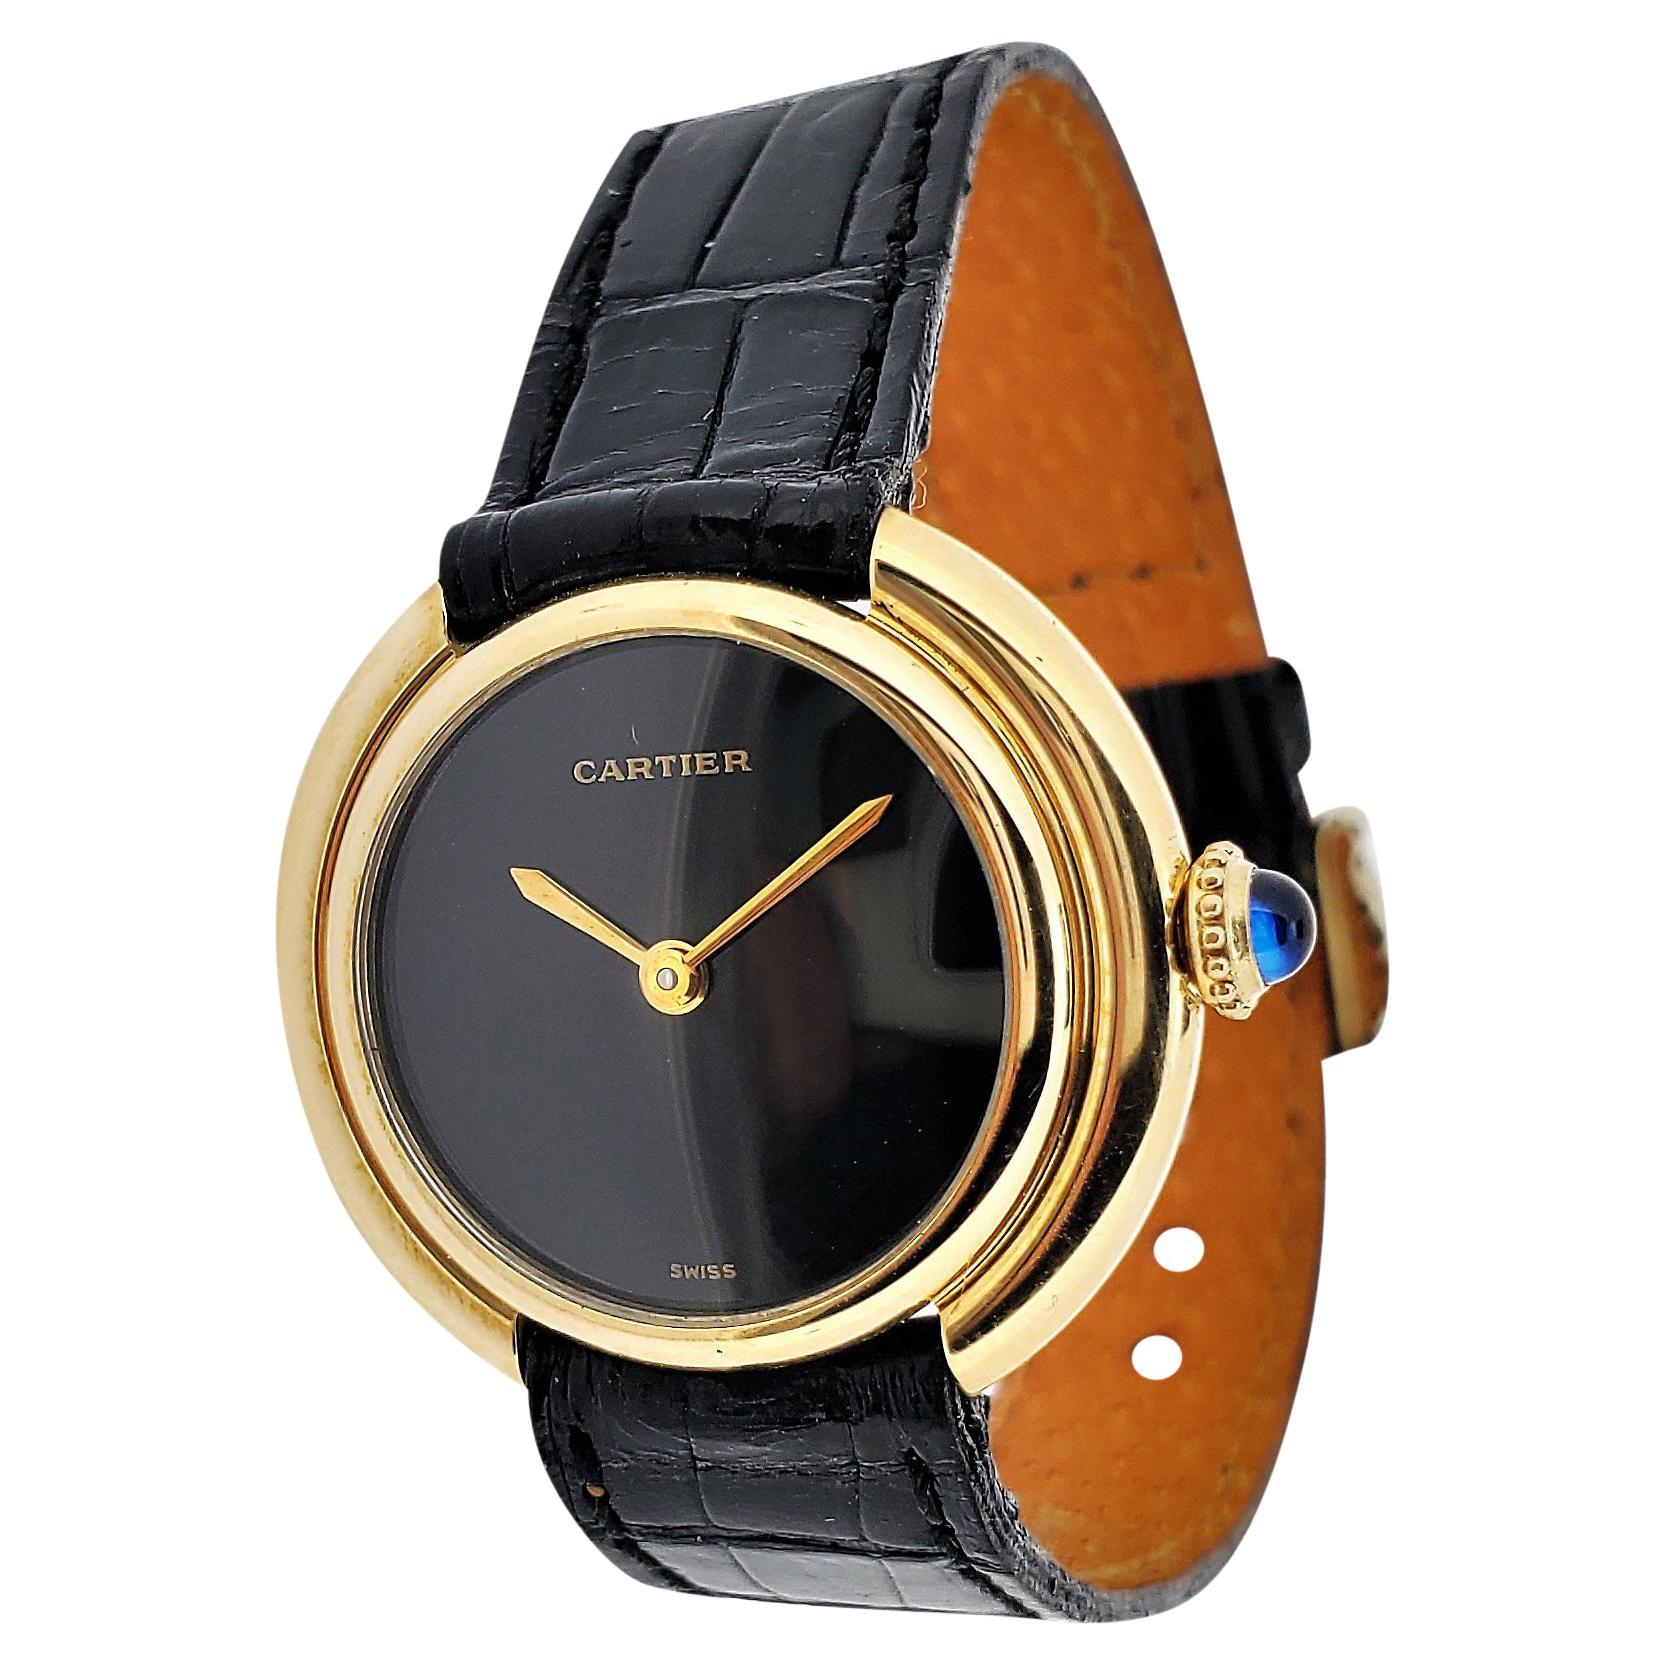 Cartier Vendome Small Size with Black Dial circa 1975-1985 For Sale